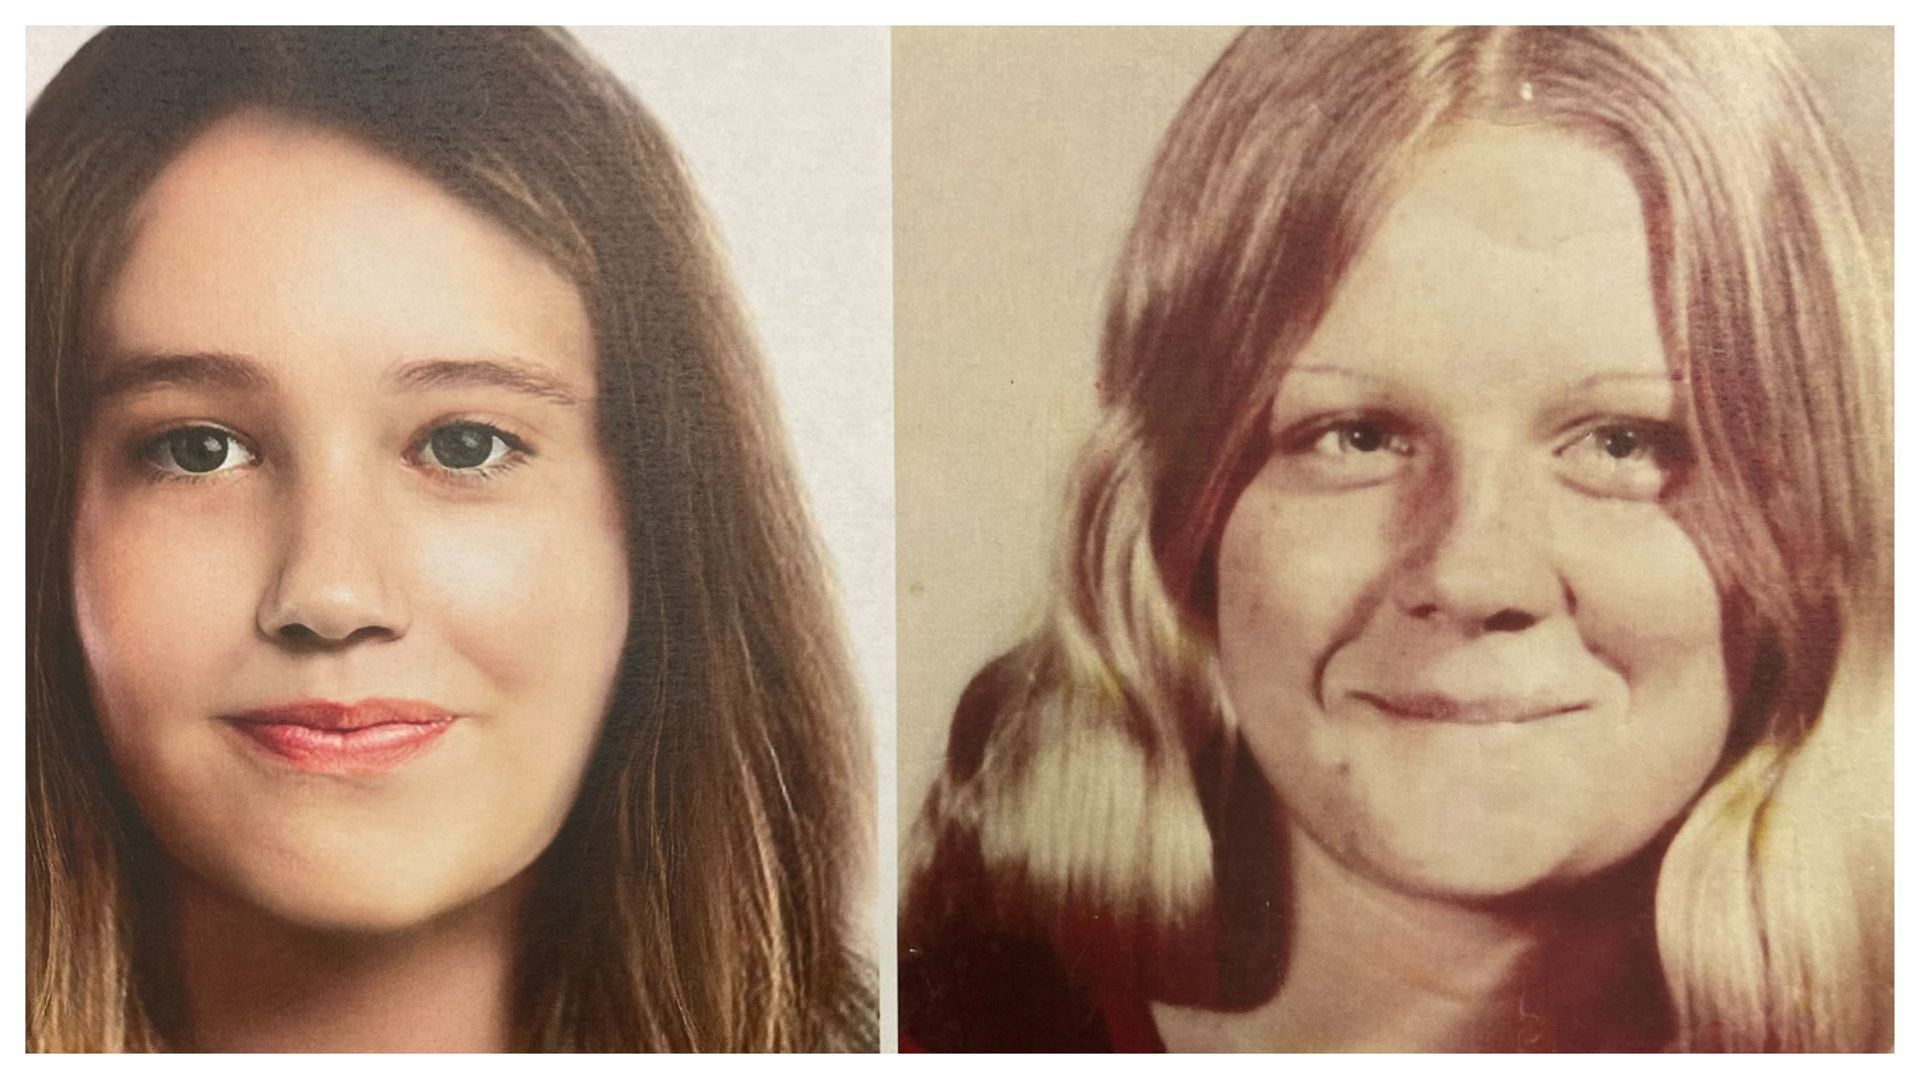 Susan Poole&#039;s identity was finally revealed with the help of DNA technology (Image via PBSO/Twitter)